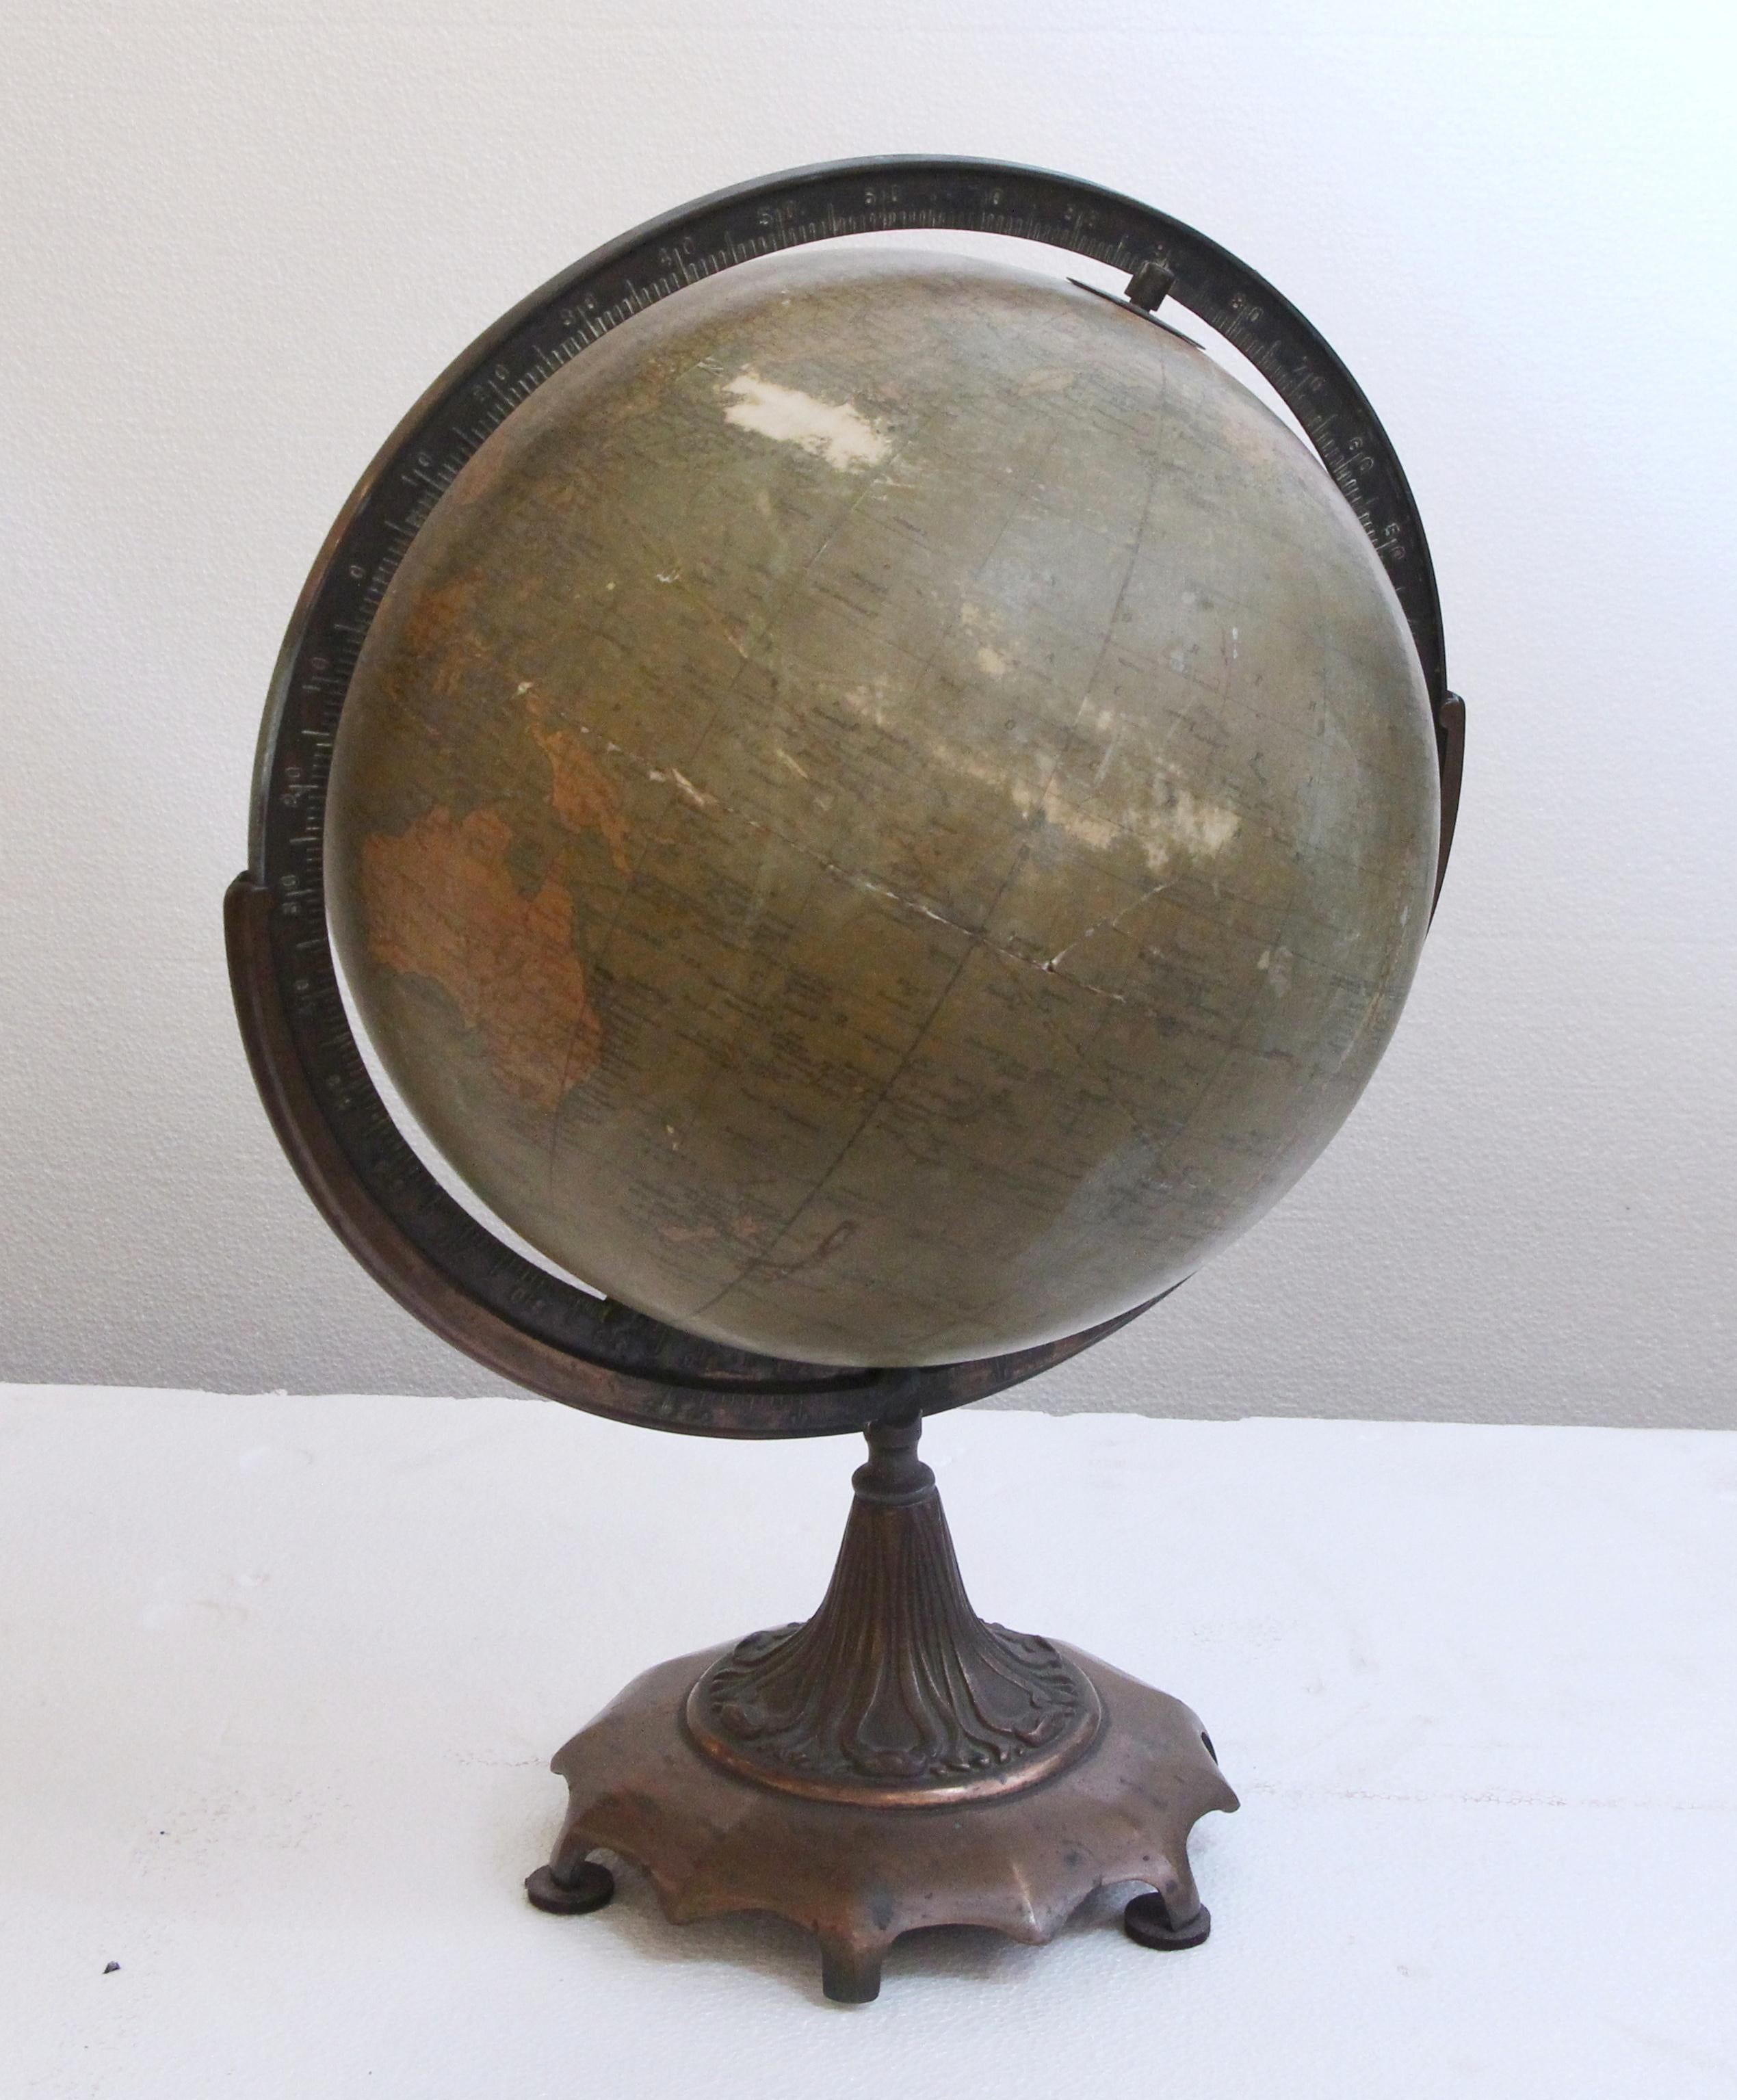 1930s Weber Costello Co. 12. in diameter globe on a decorative bronze stand. The bottom is stamped W.C. Co-7. This can be seen at our 2420 Broadway location on the upper west side in Manhattan.